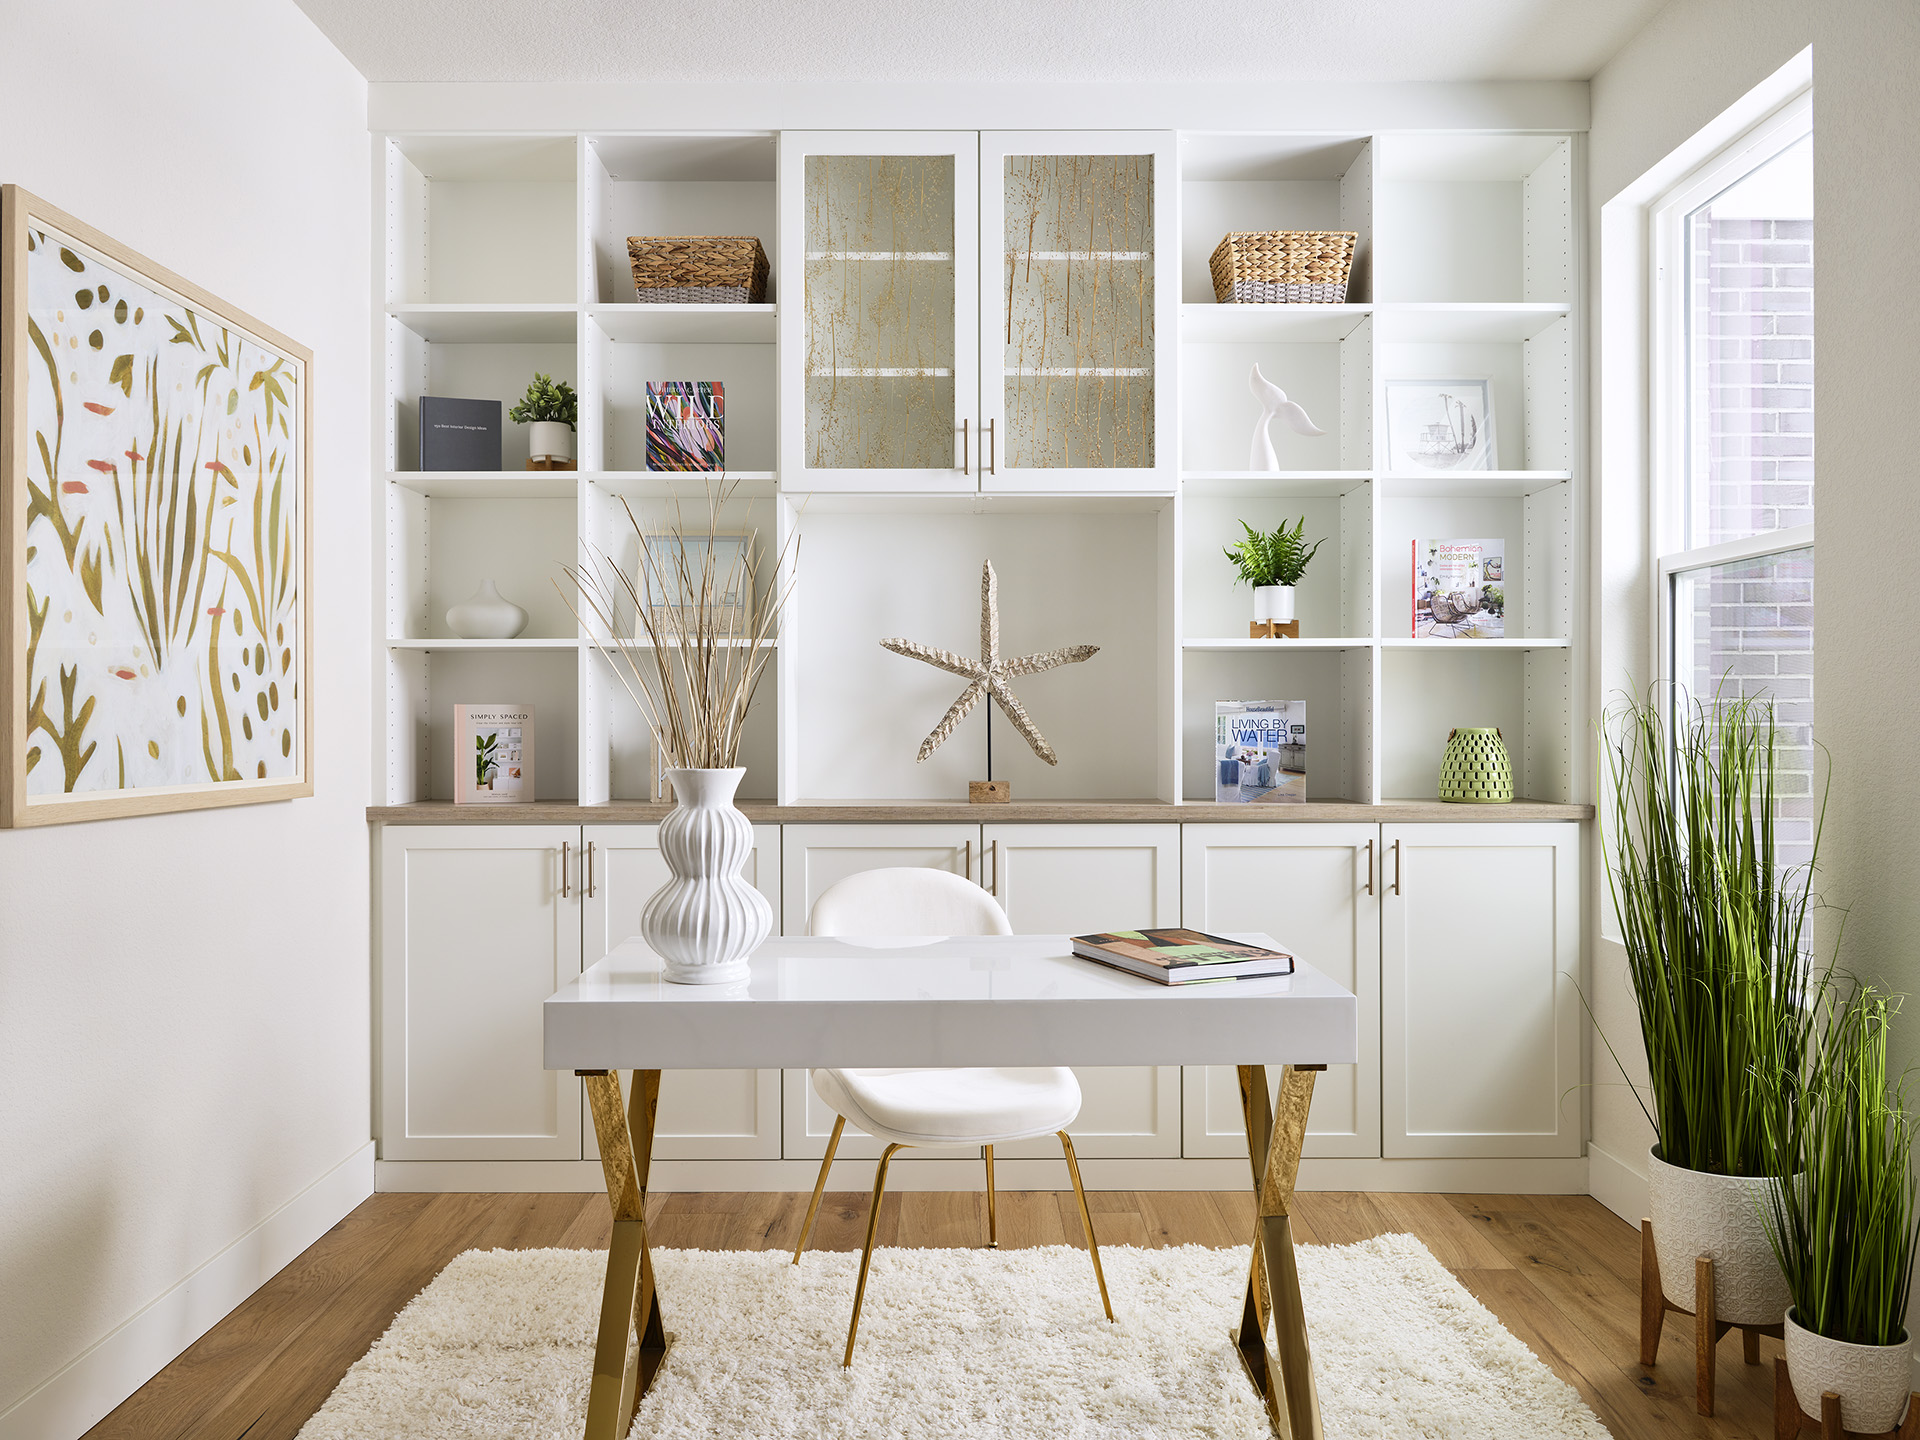 A stylishly organized study with white cabinetry, desk, chair, wall art, plants, books, and decorative pieces